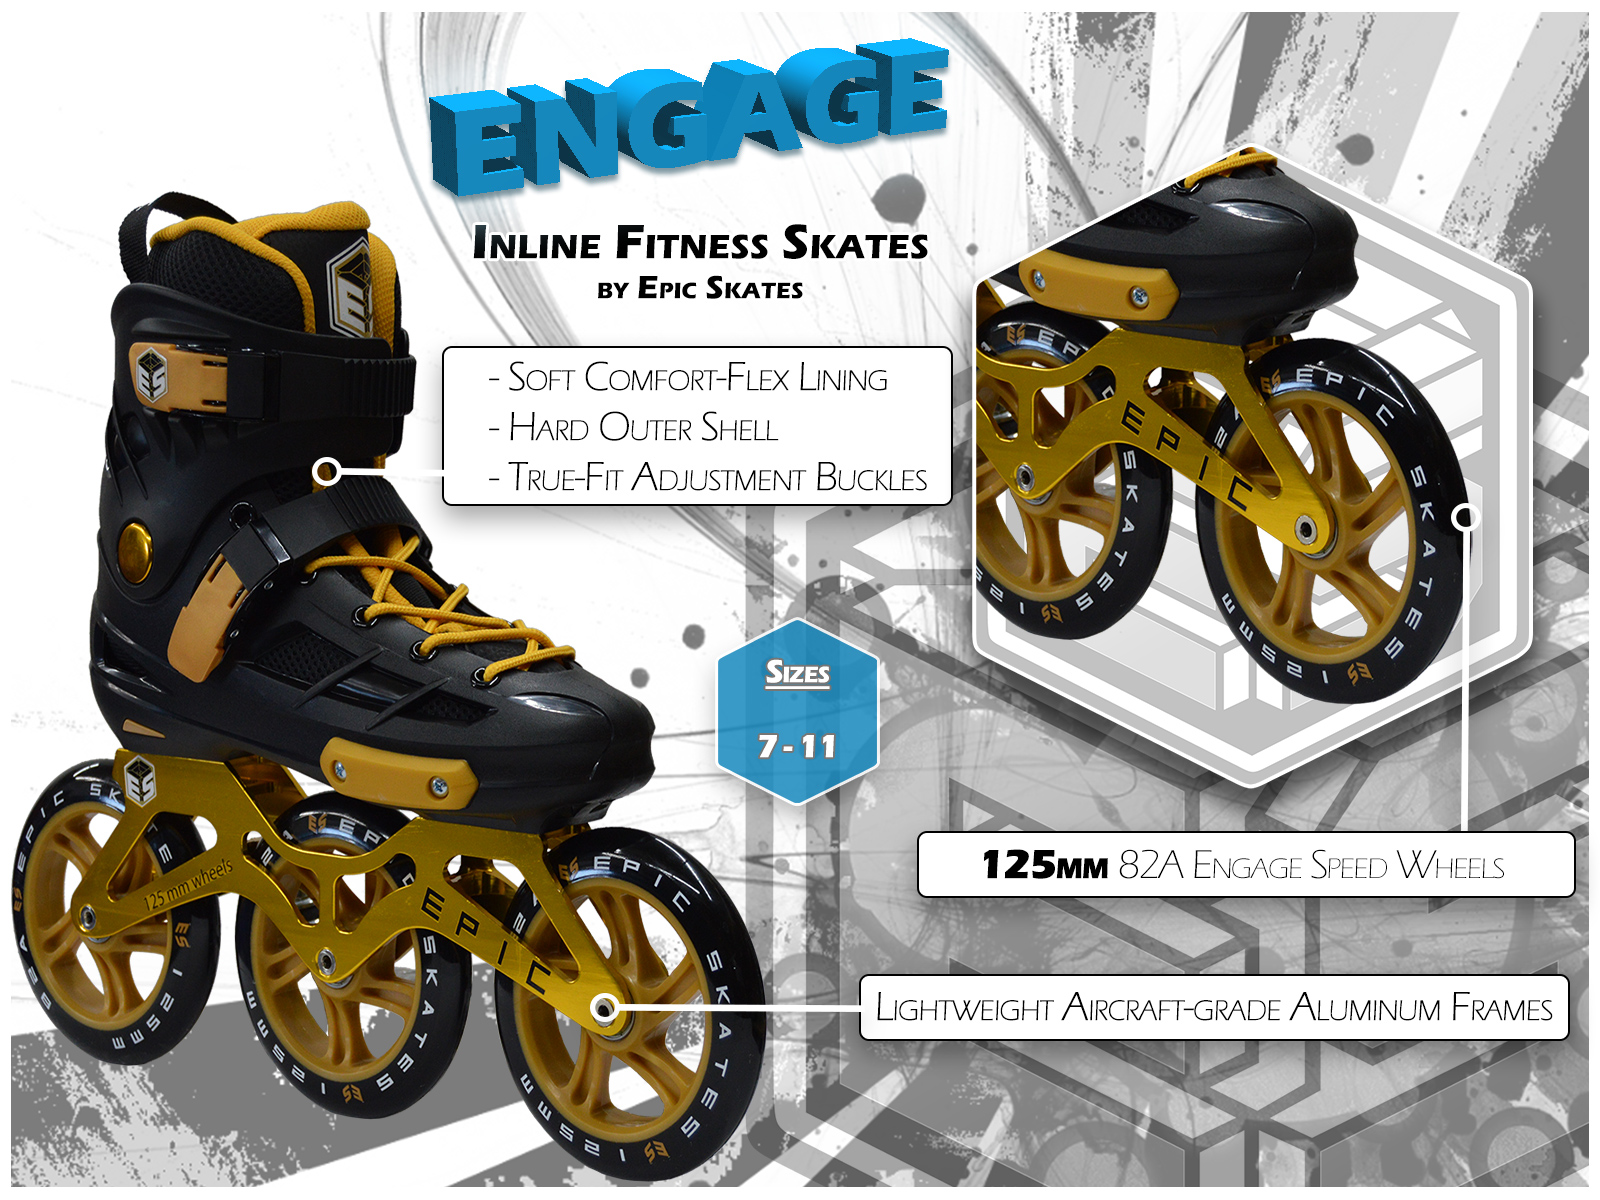 Epic Engage Inline Skates Indoor/Outdoor 125mm Speed Fast Cruiser FREE POST 